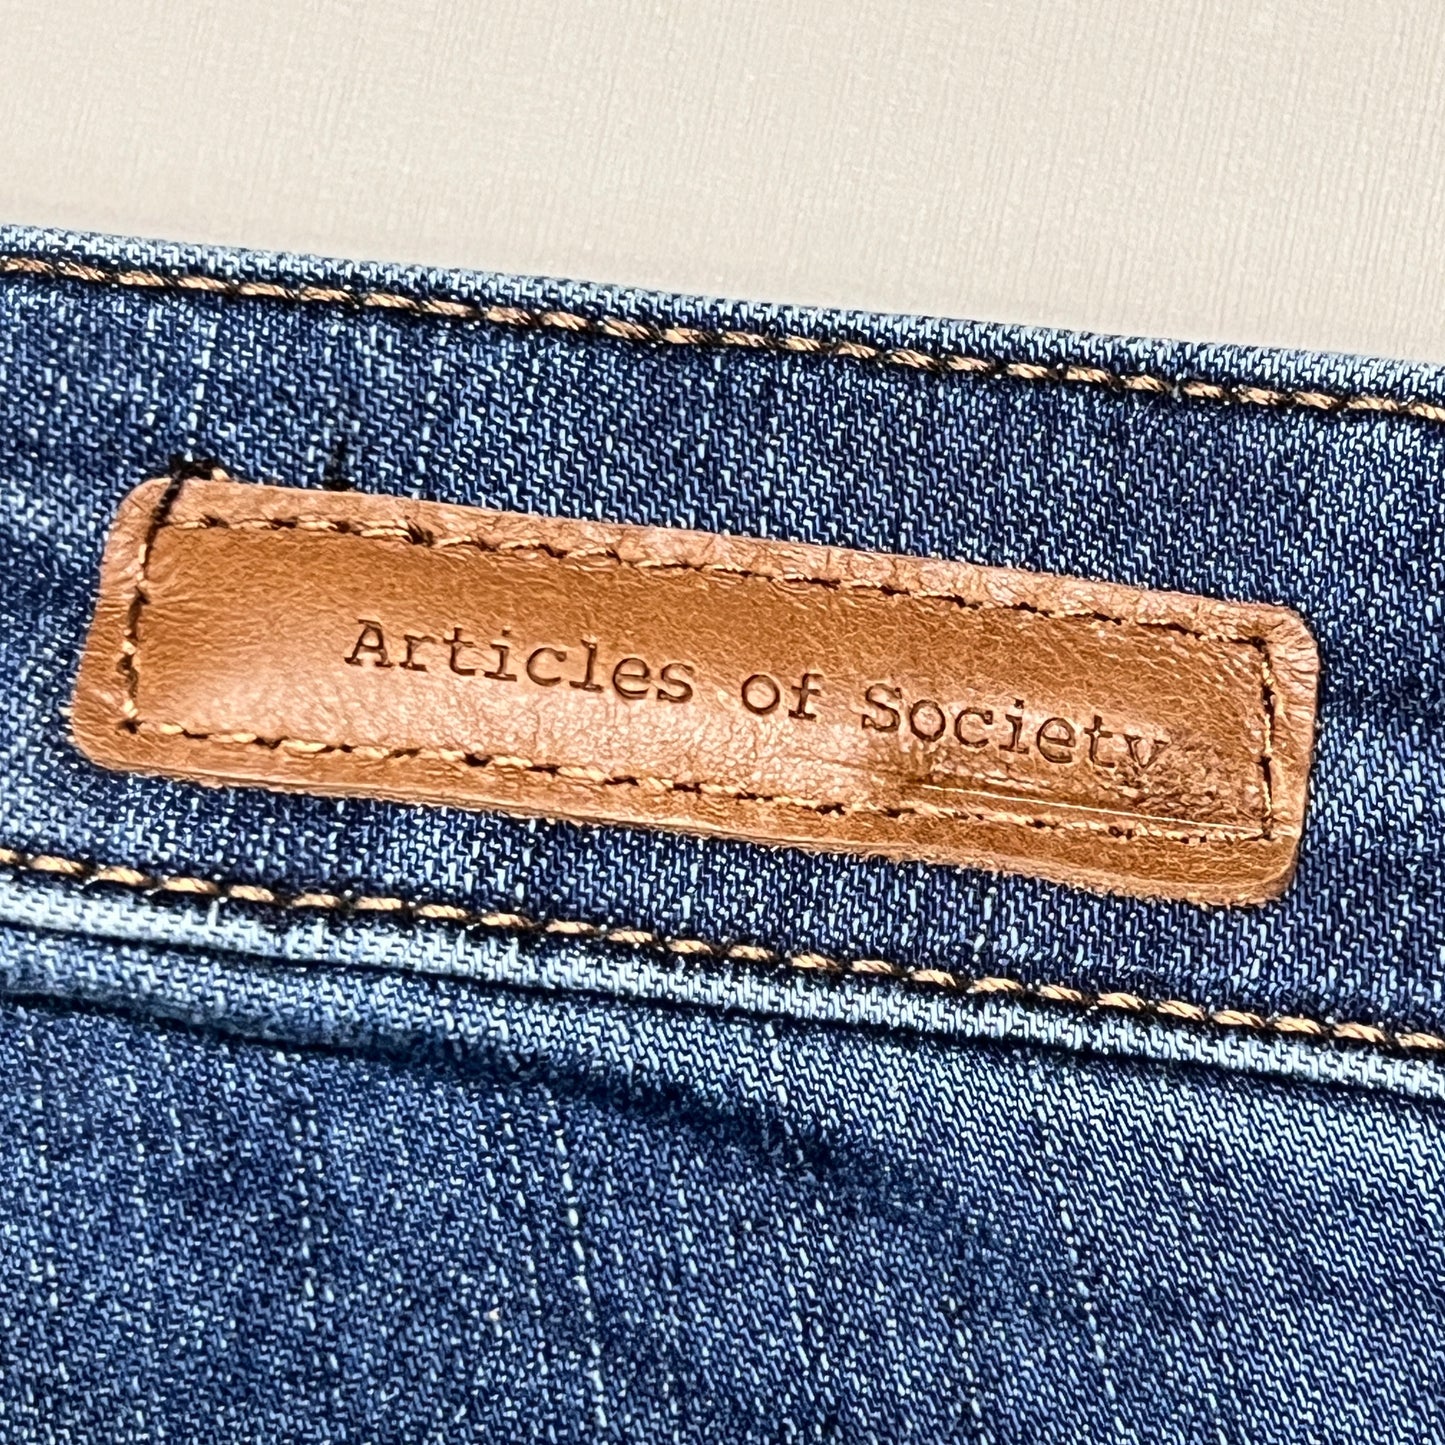 ARTICLES OF SOCIETY Hilo Ripped Denim Jeans Women's Sz 32 Blue 5350PLV-706 (New)